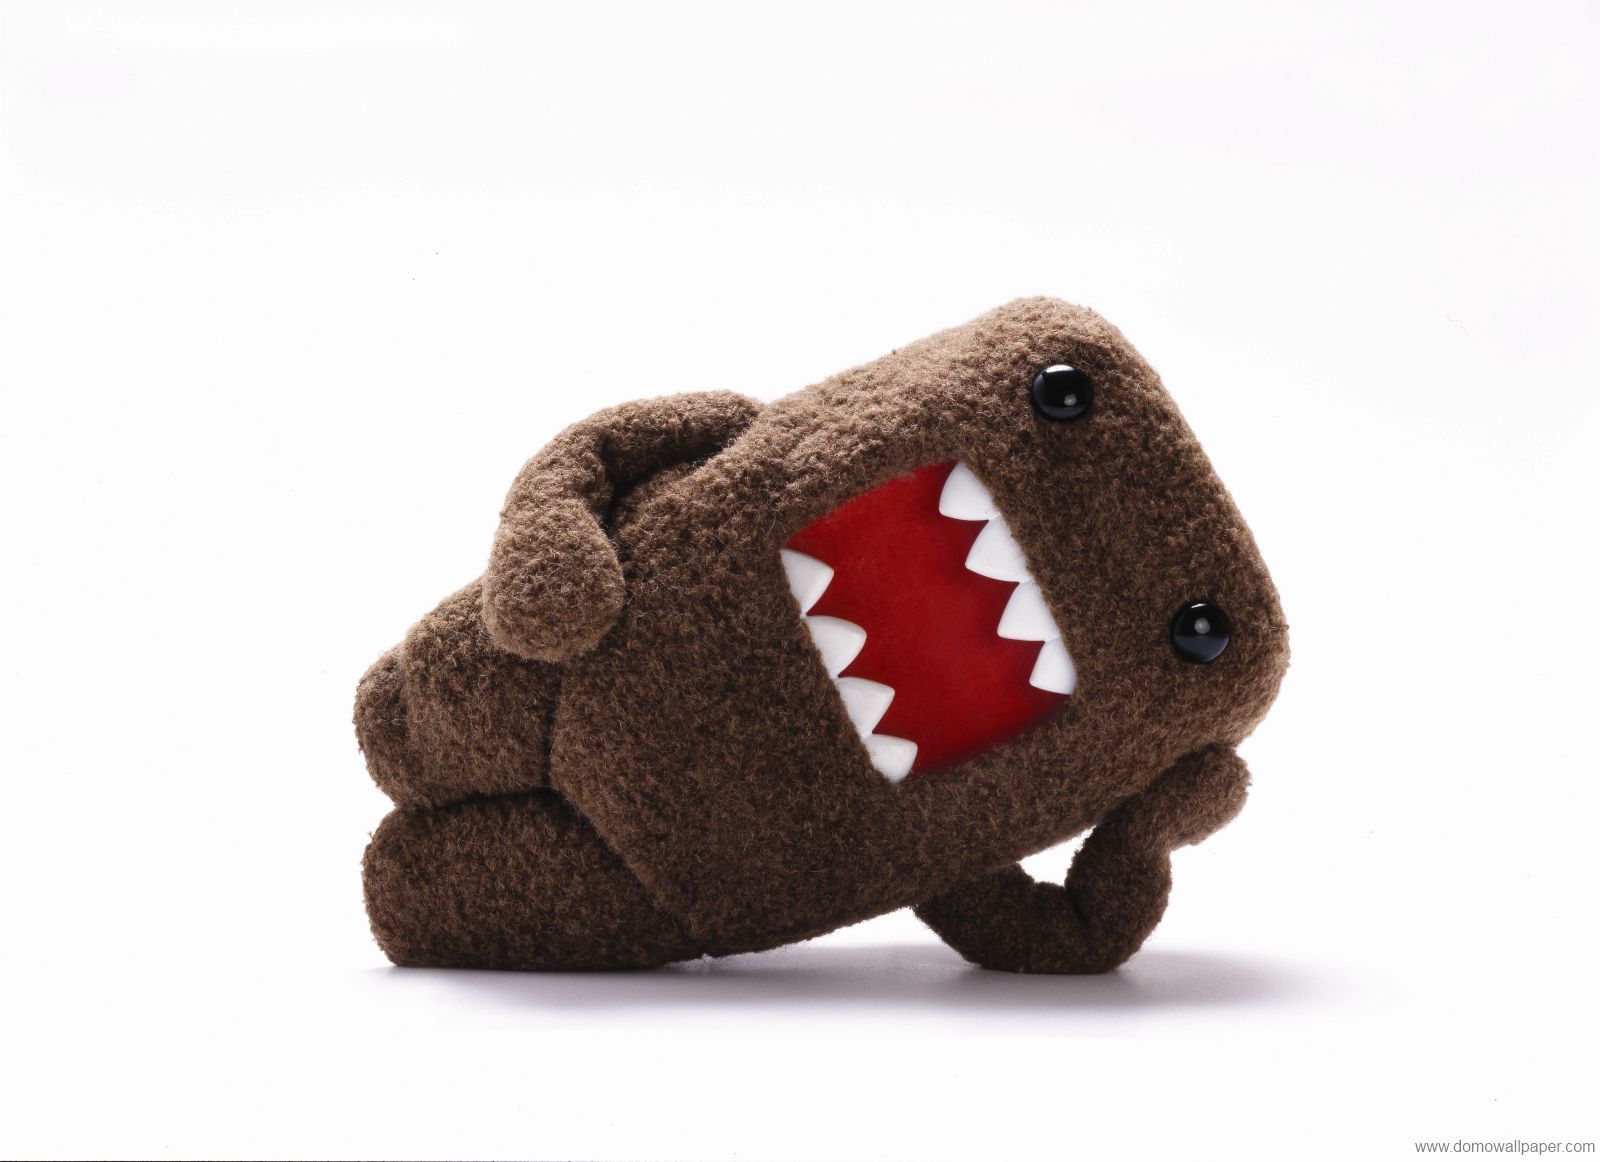 Domo Wallpapers